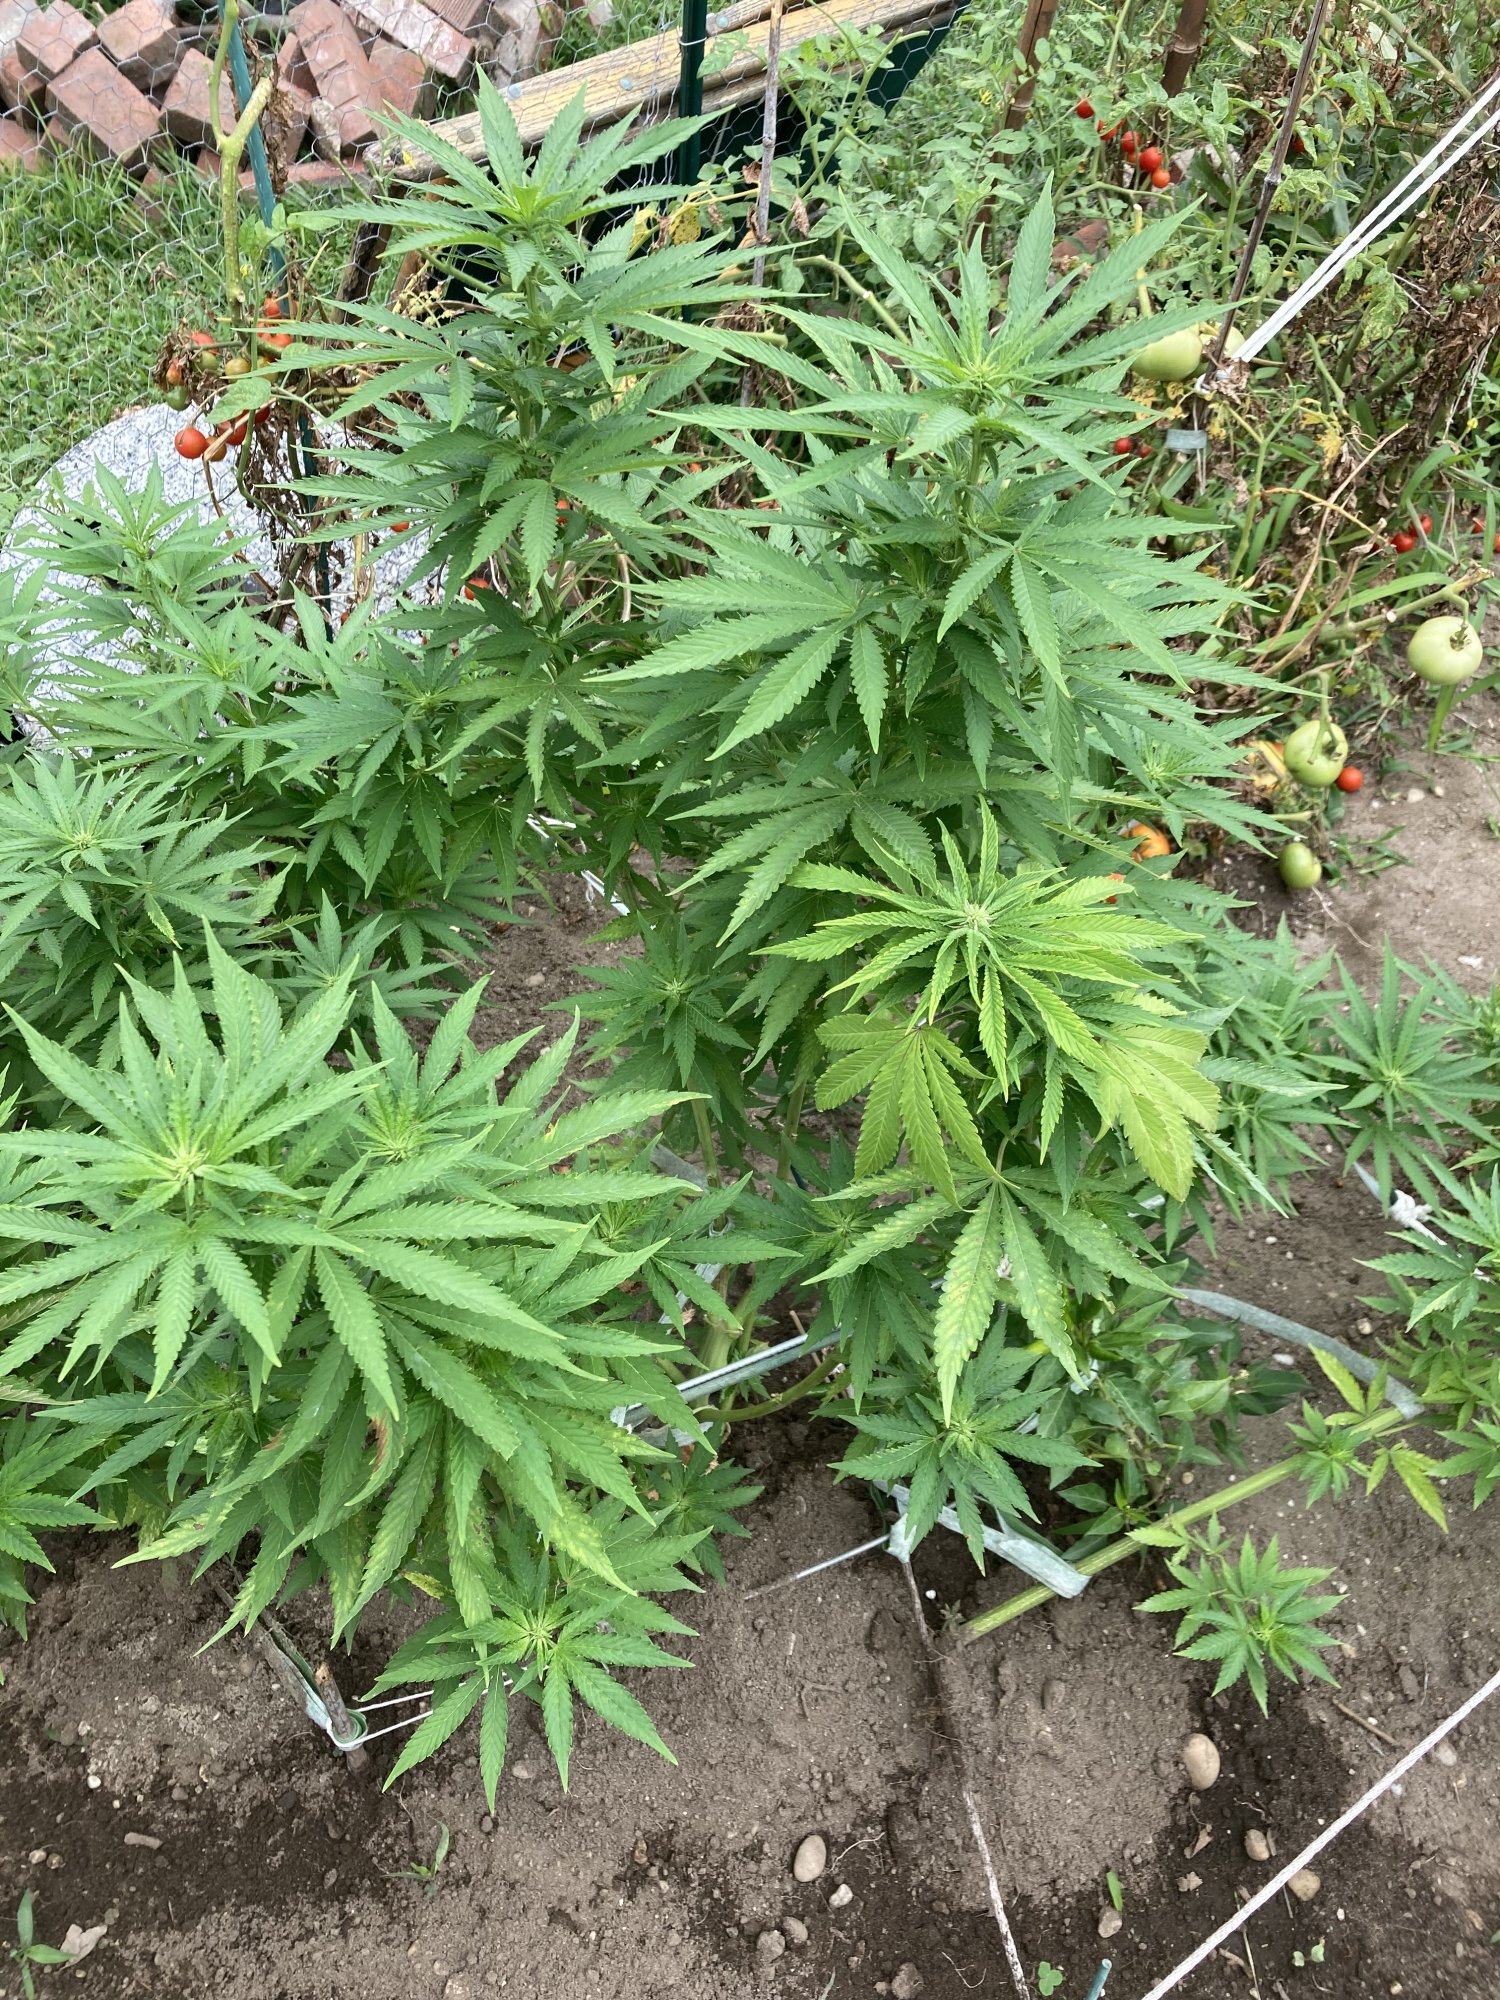 Unsure of nutrient burn or possible other issue outdoors first grow 2